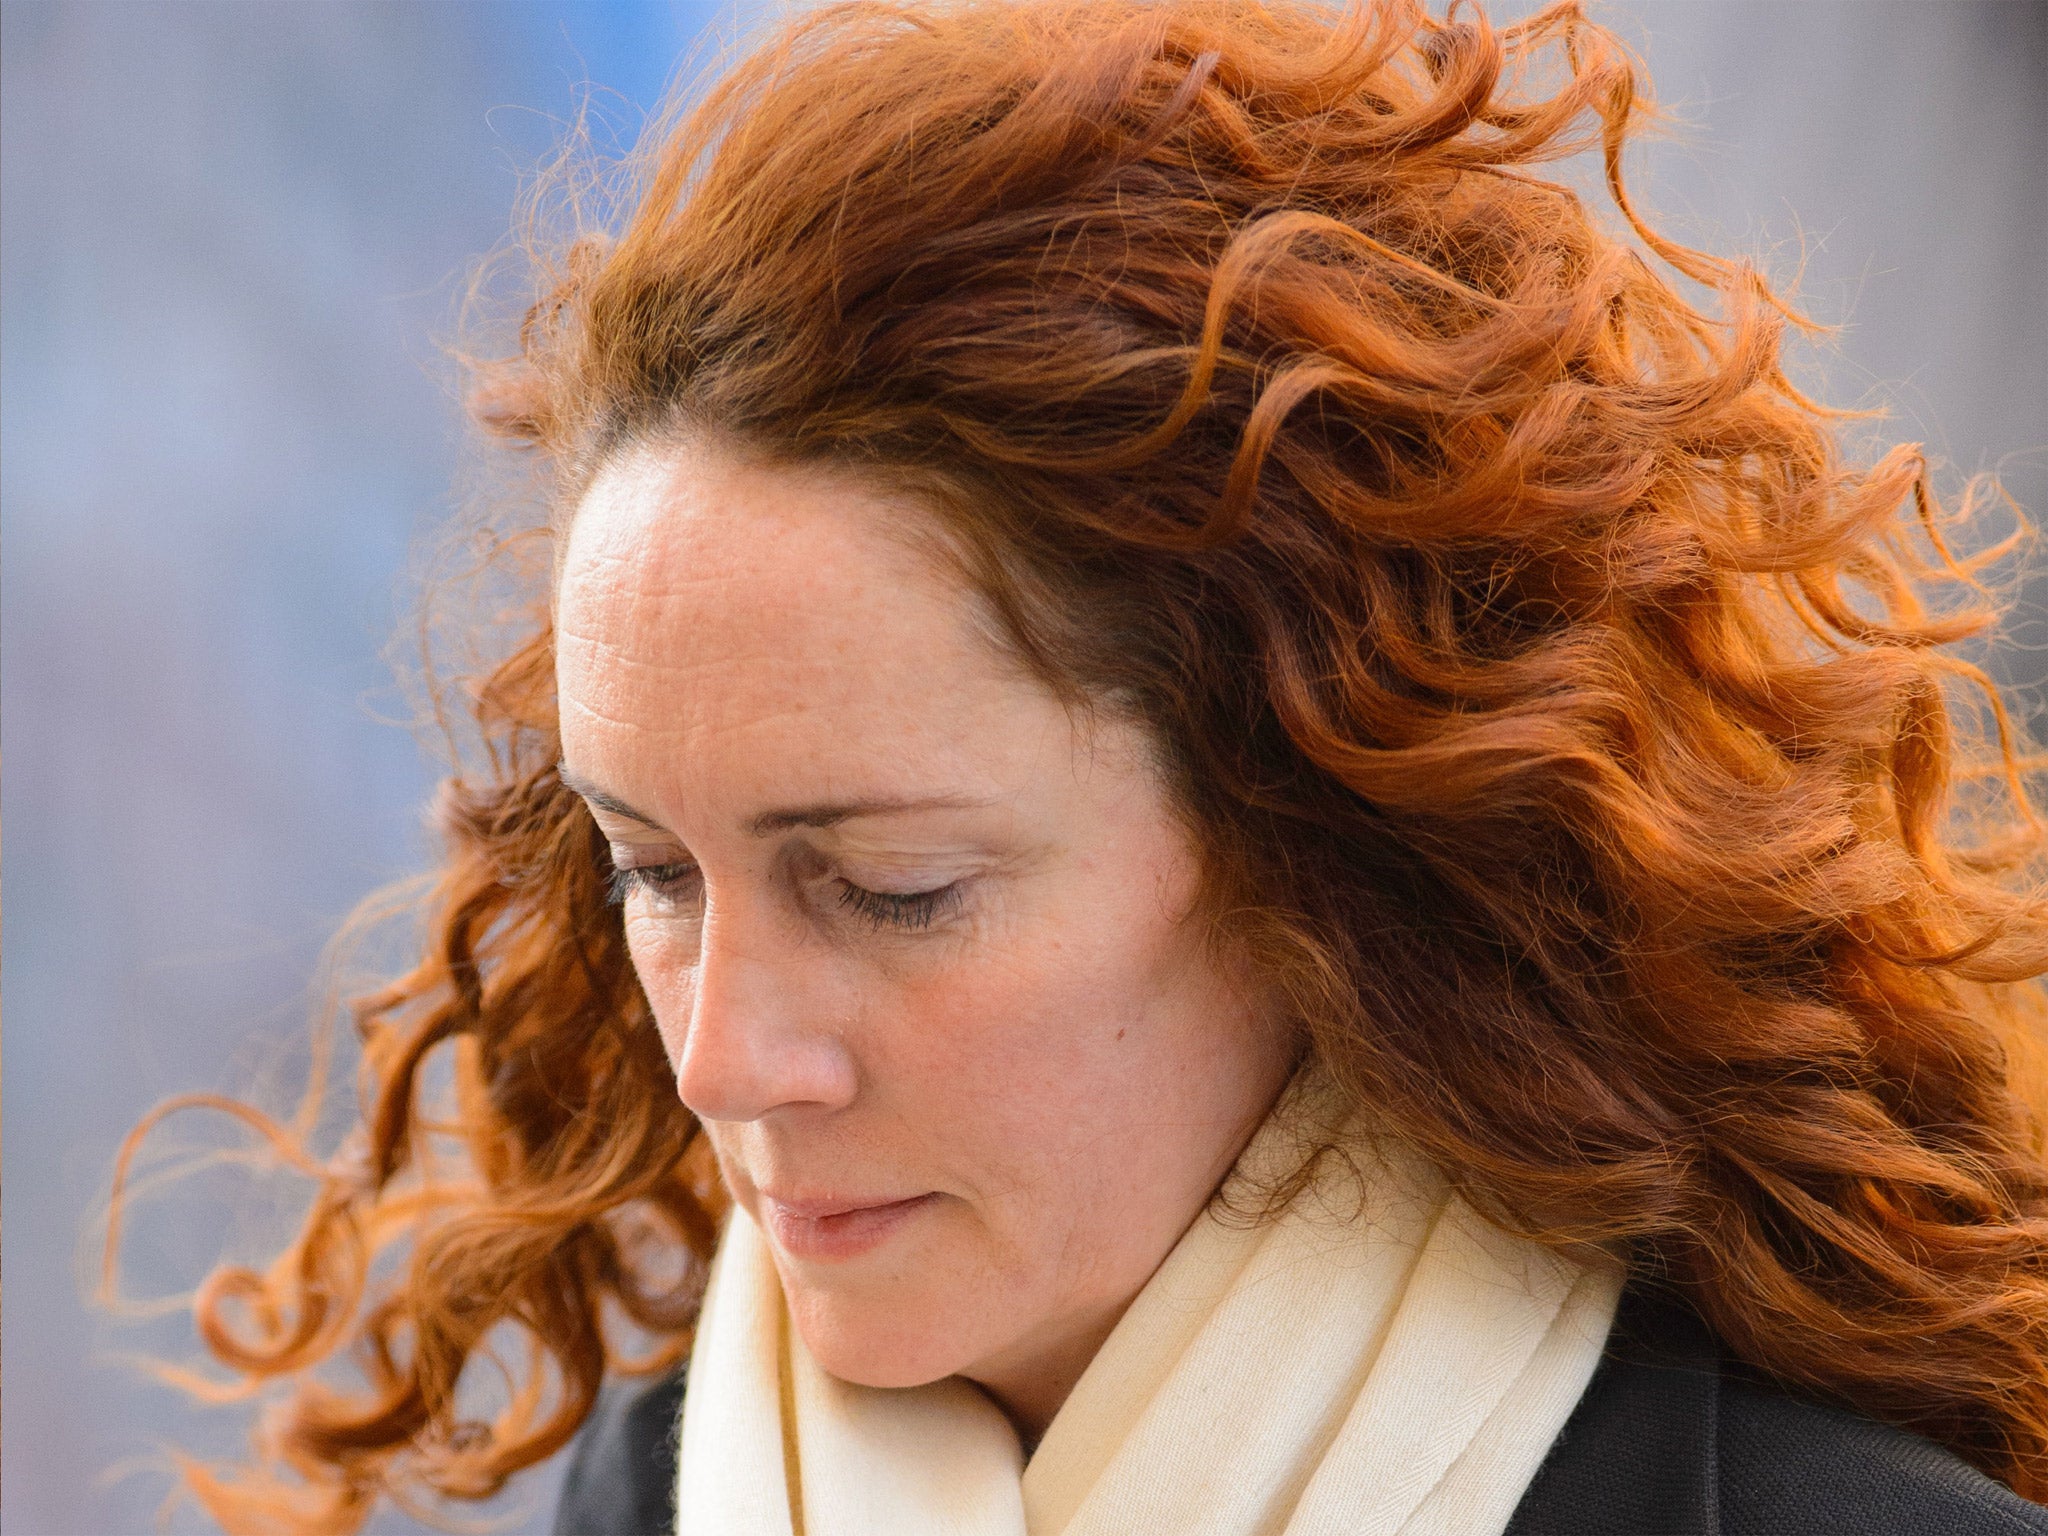 Rebekah Brooks described Andy Coulson as her 'very best friend'